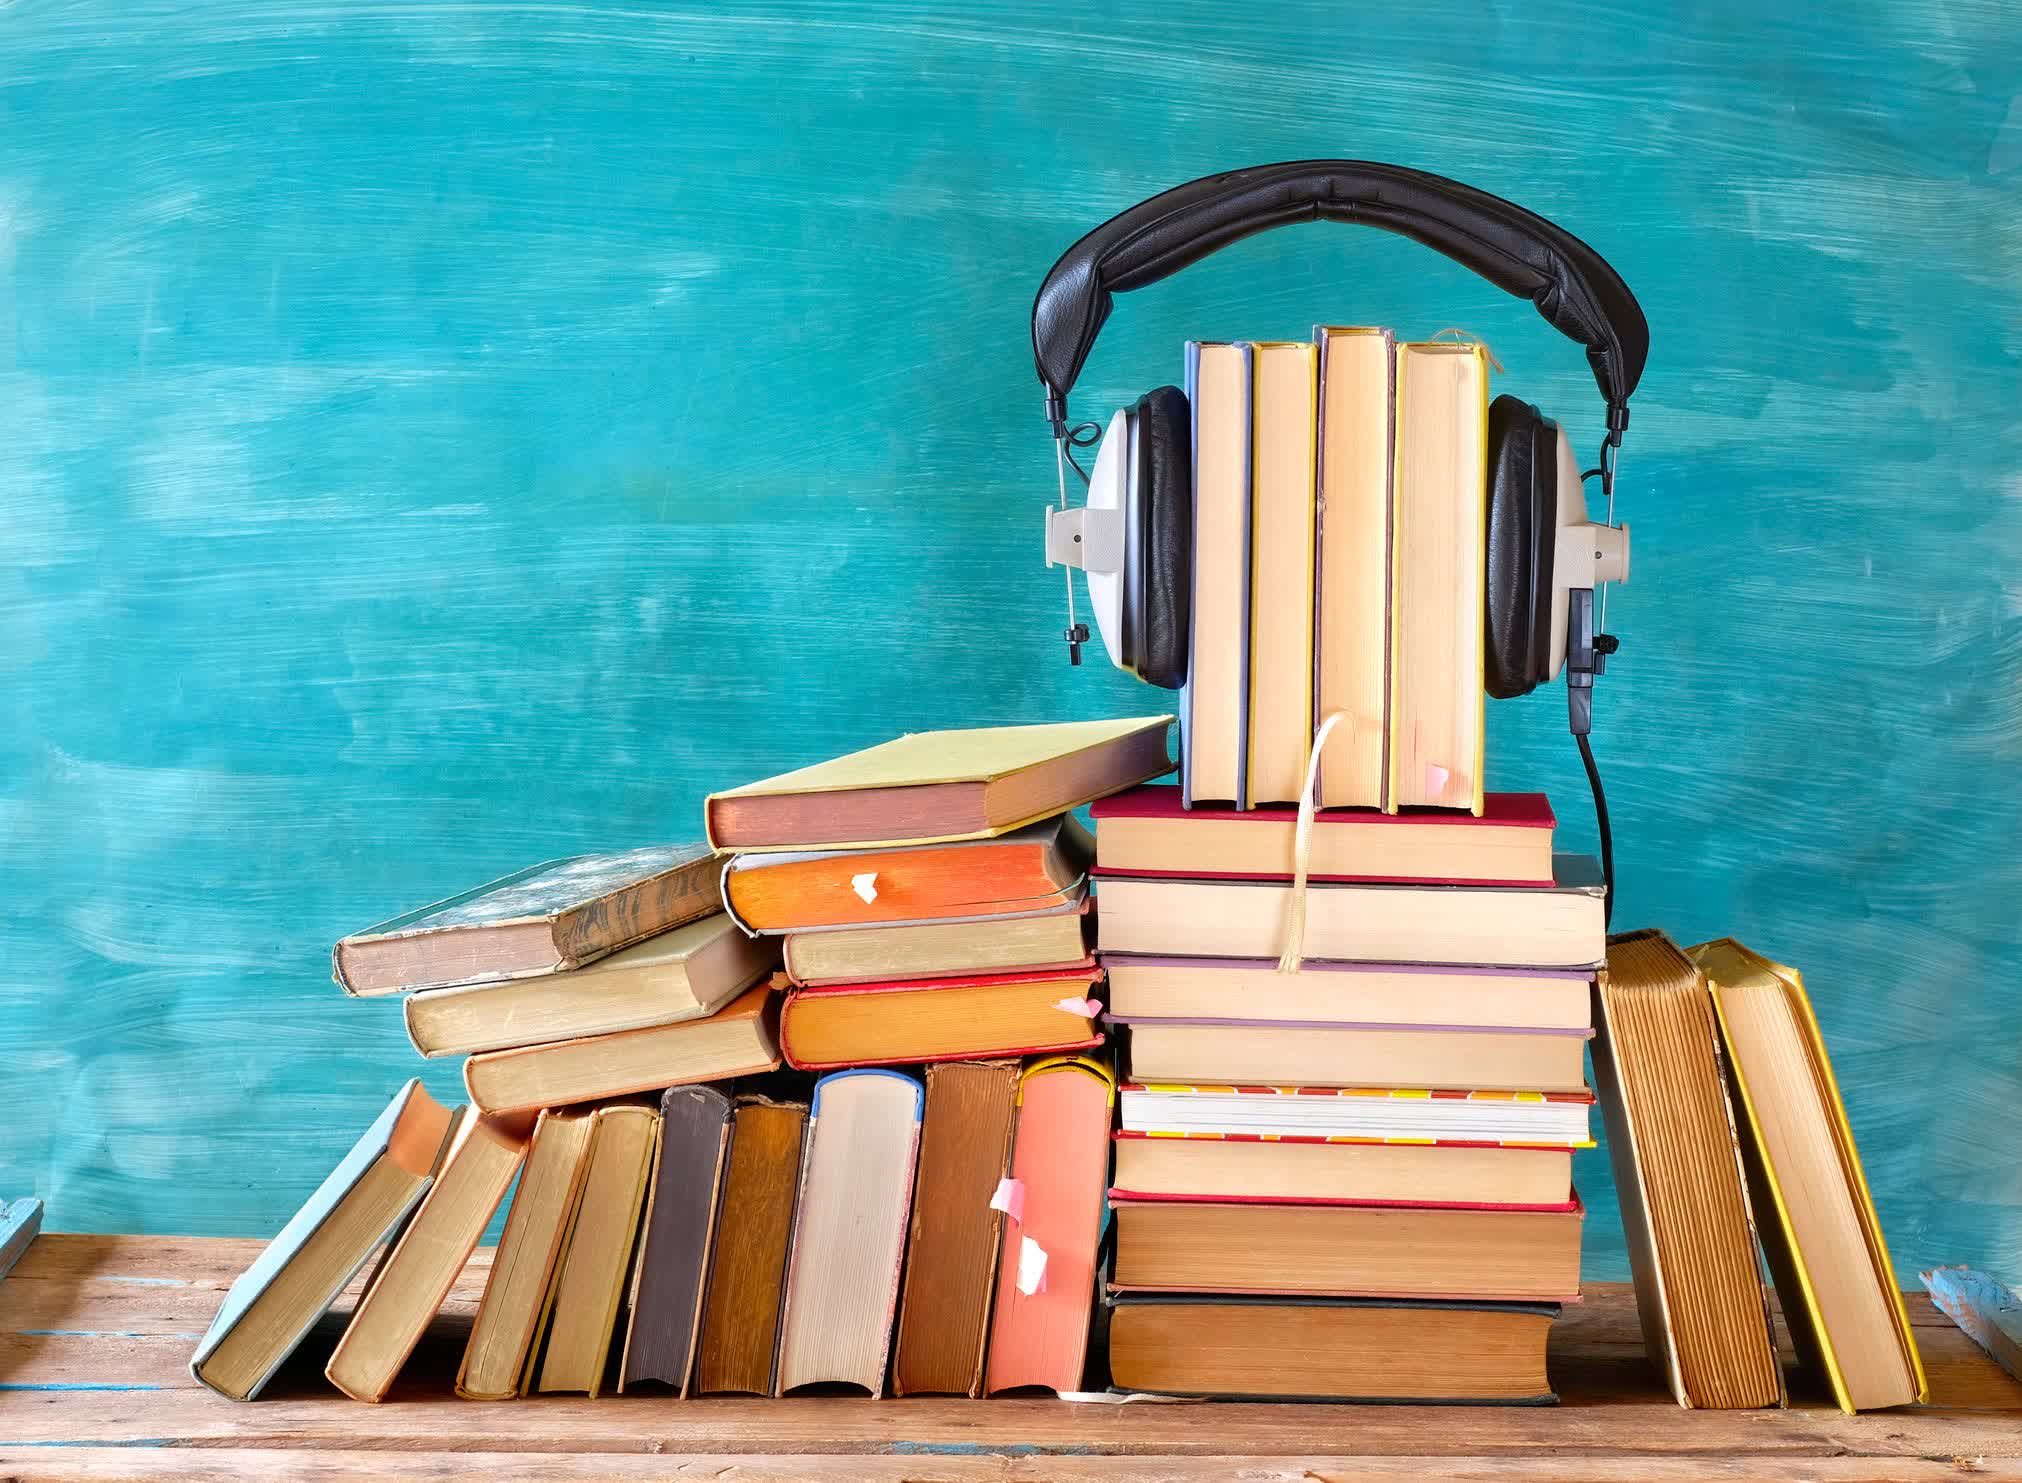 Apple is now selling audiobooks with AI-based narration